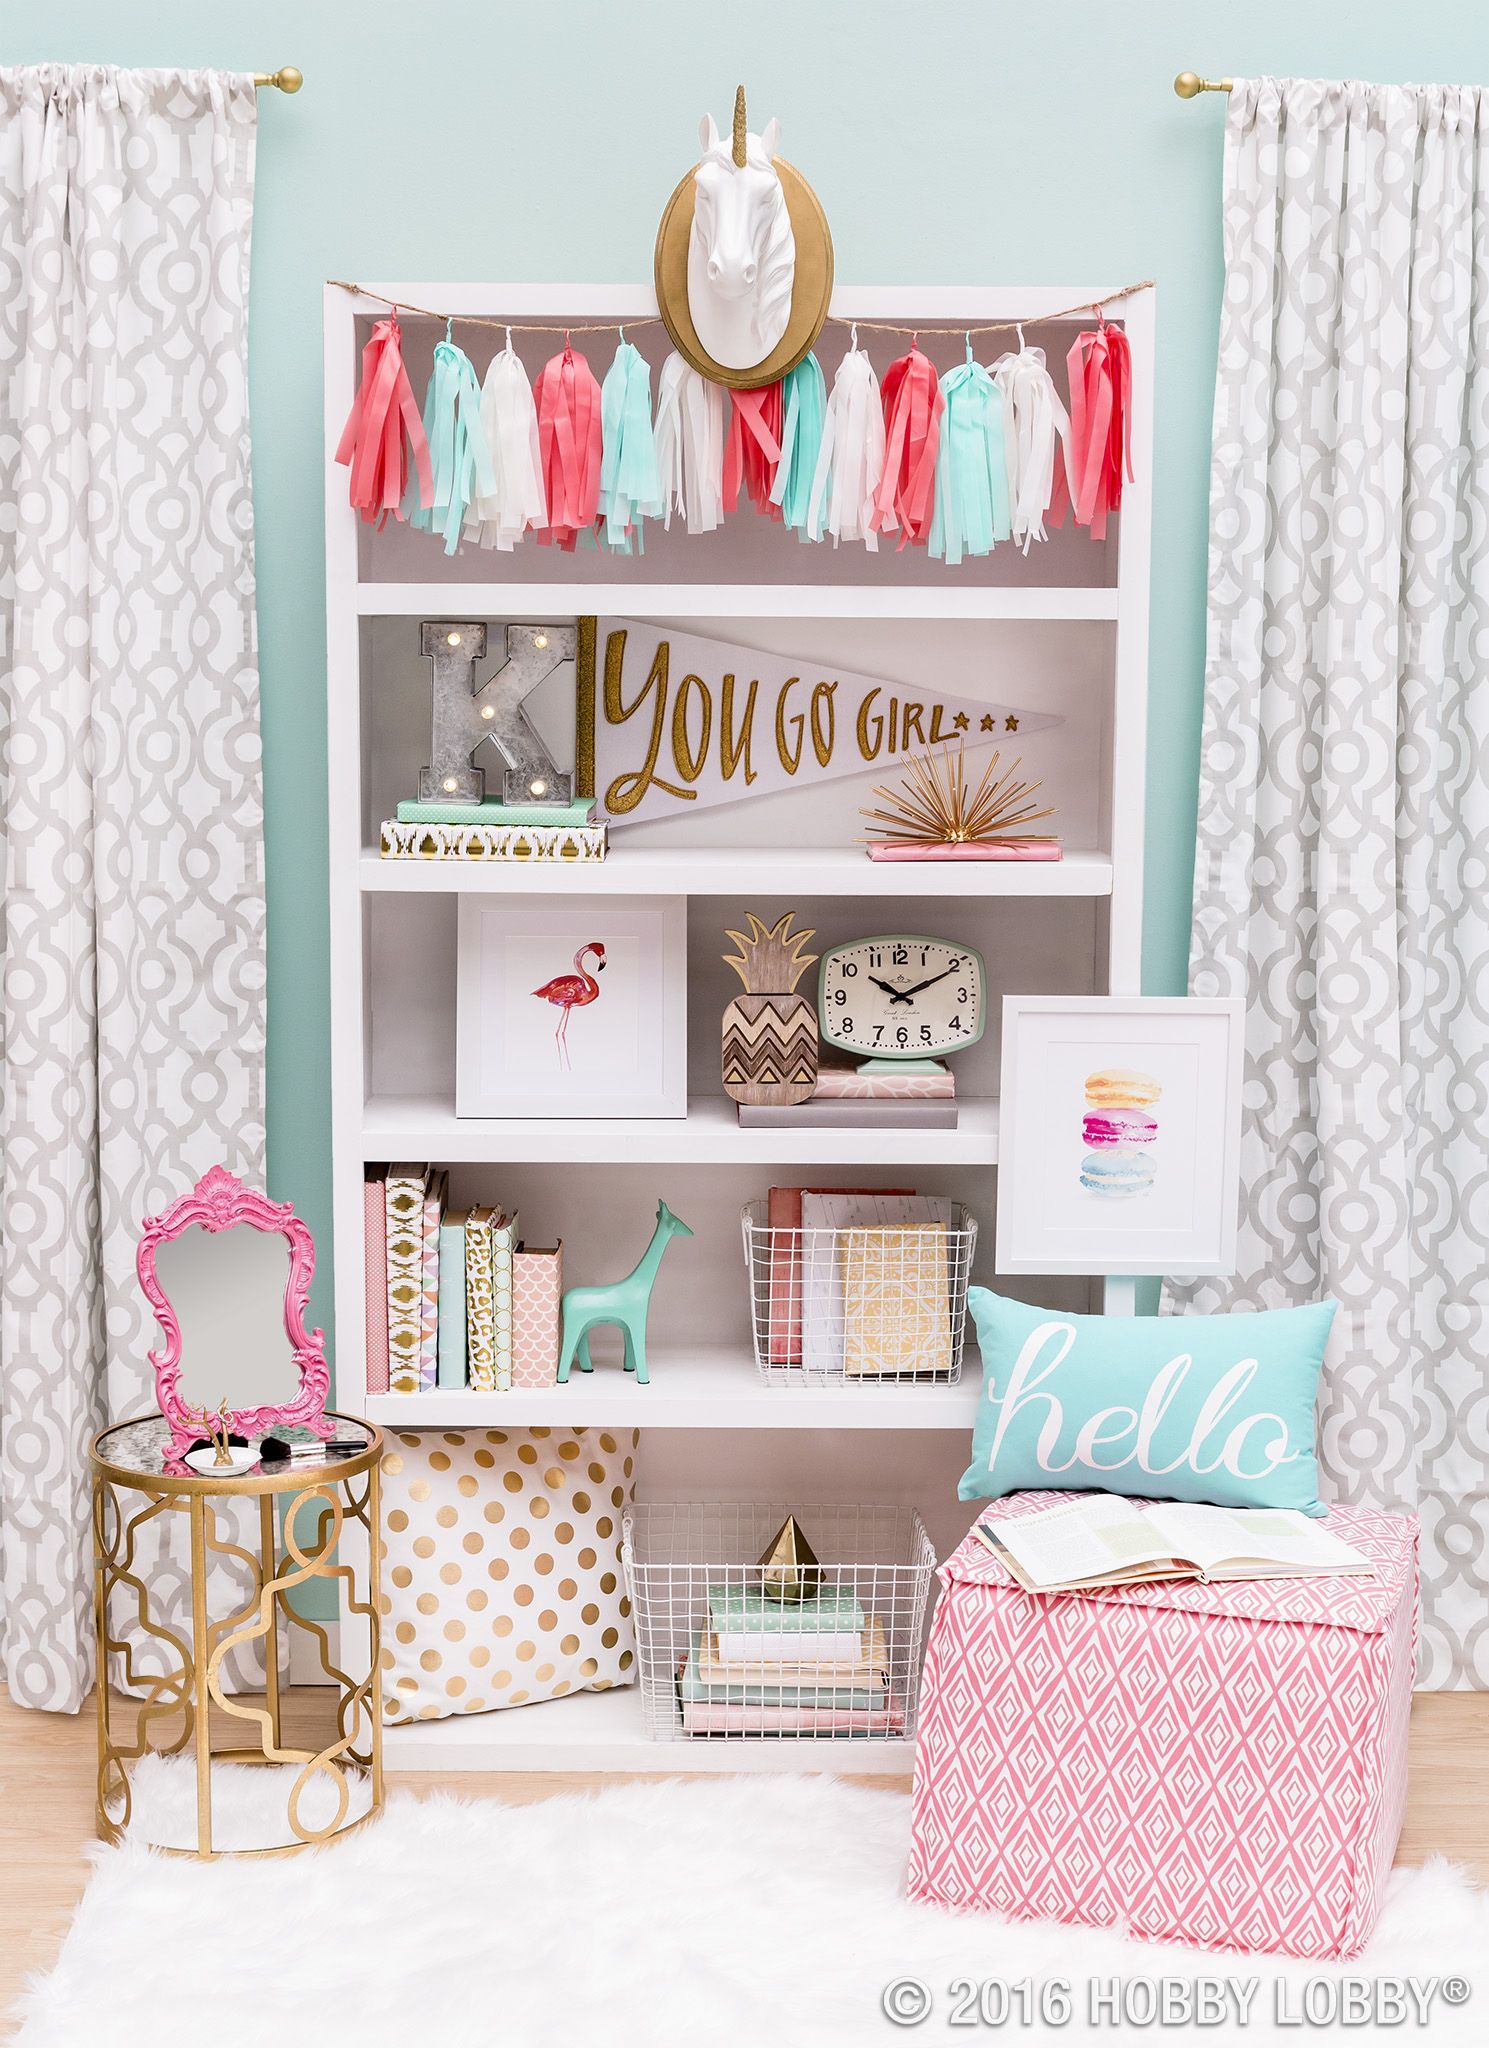 Is your little darlings decor ready for an update? Spruce up her space with trendy accents that r